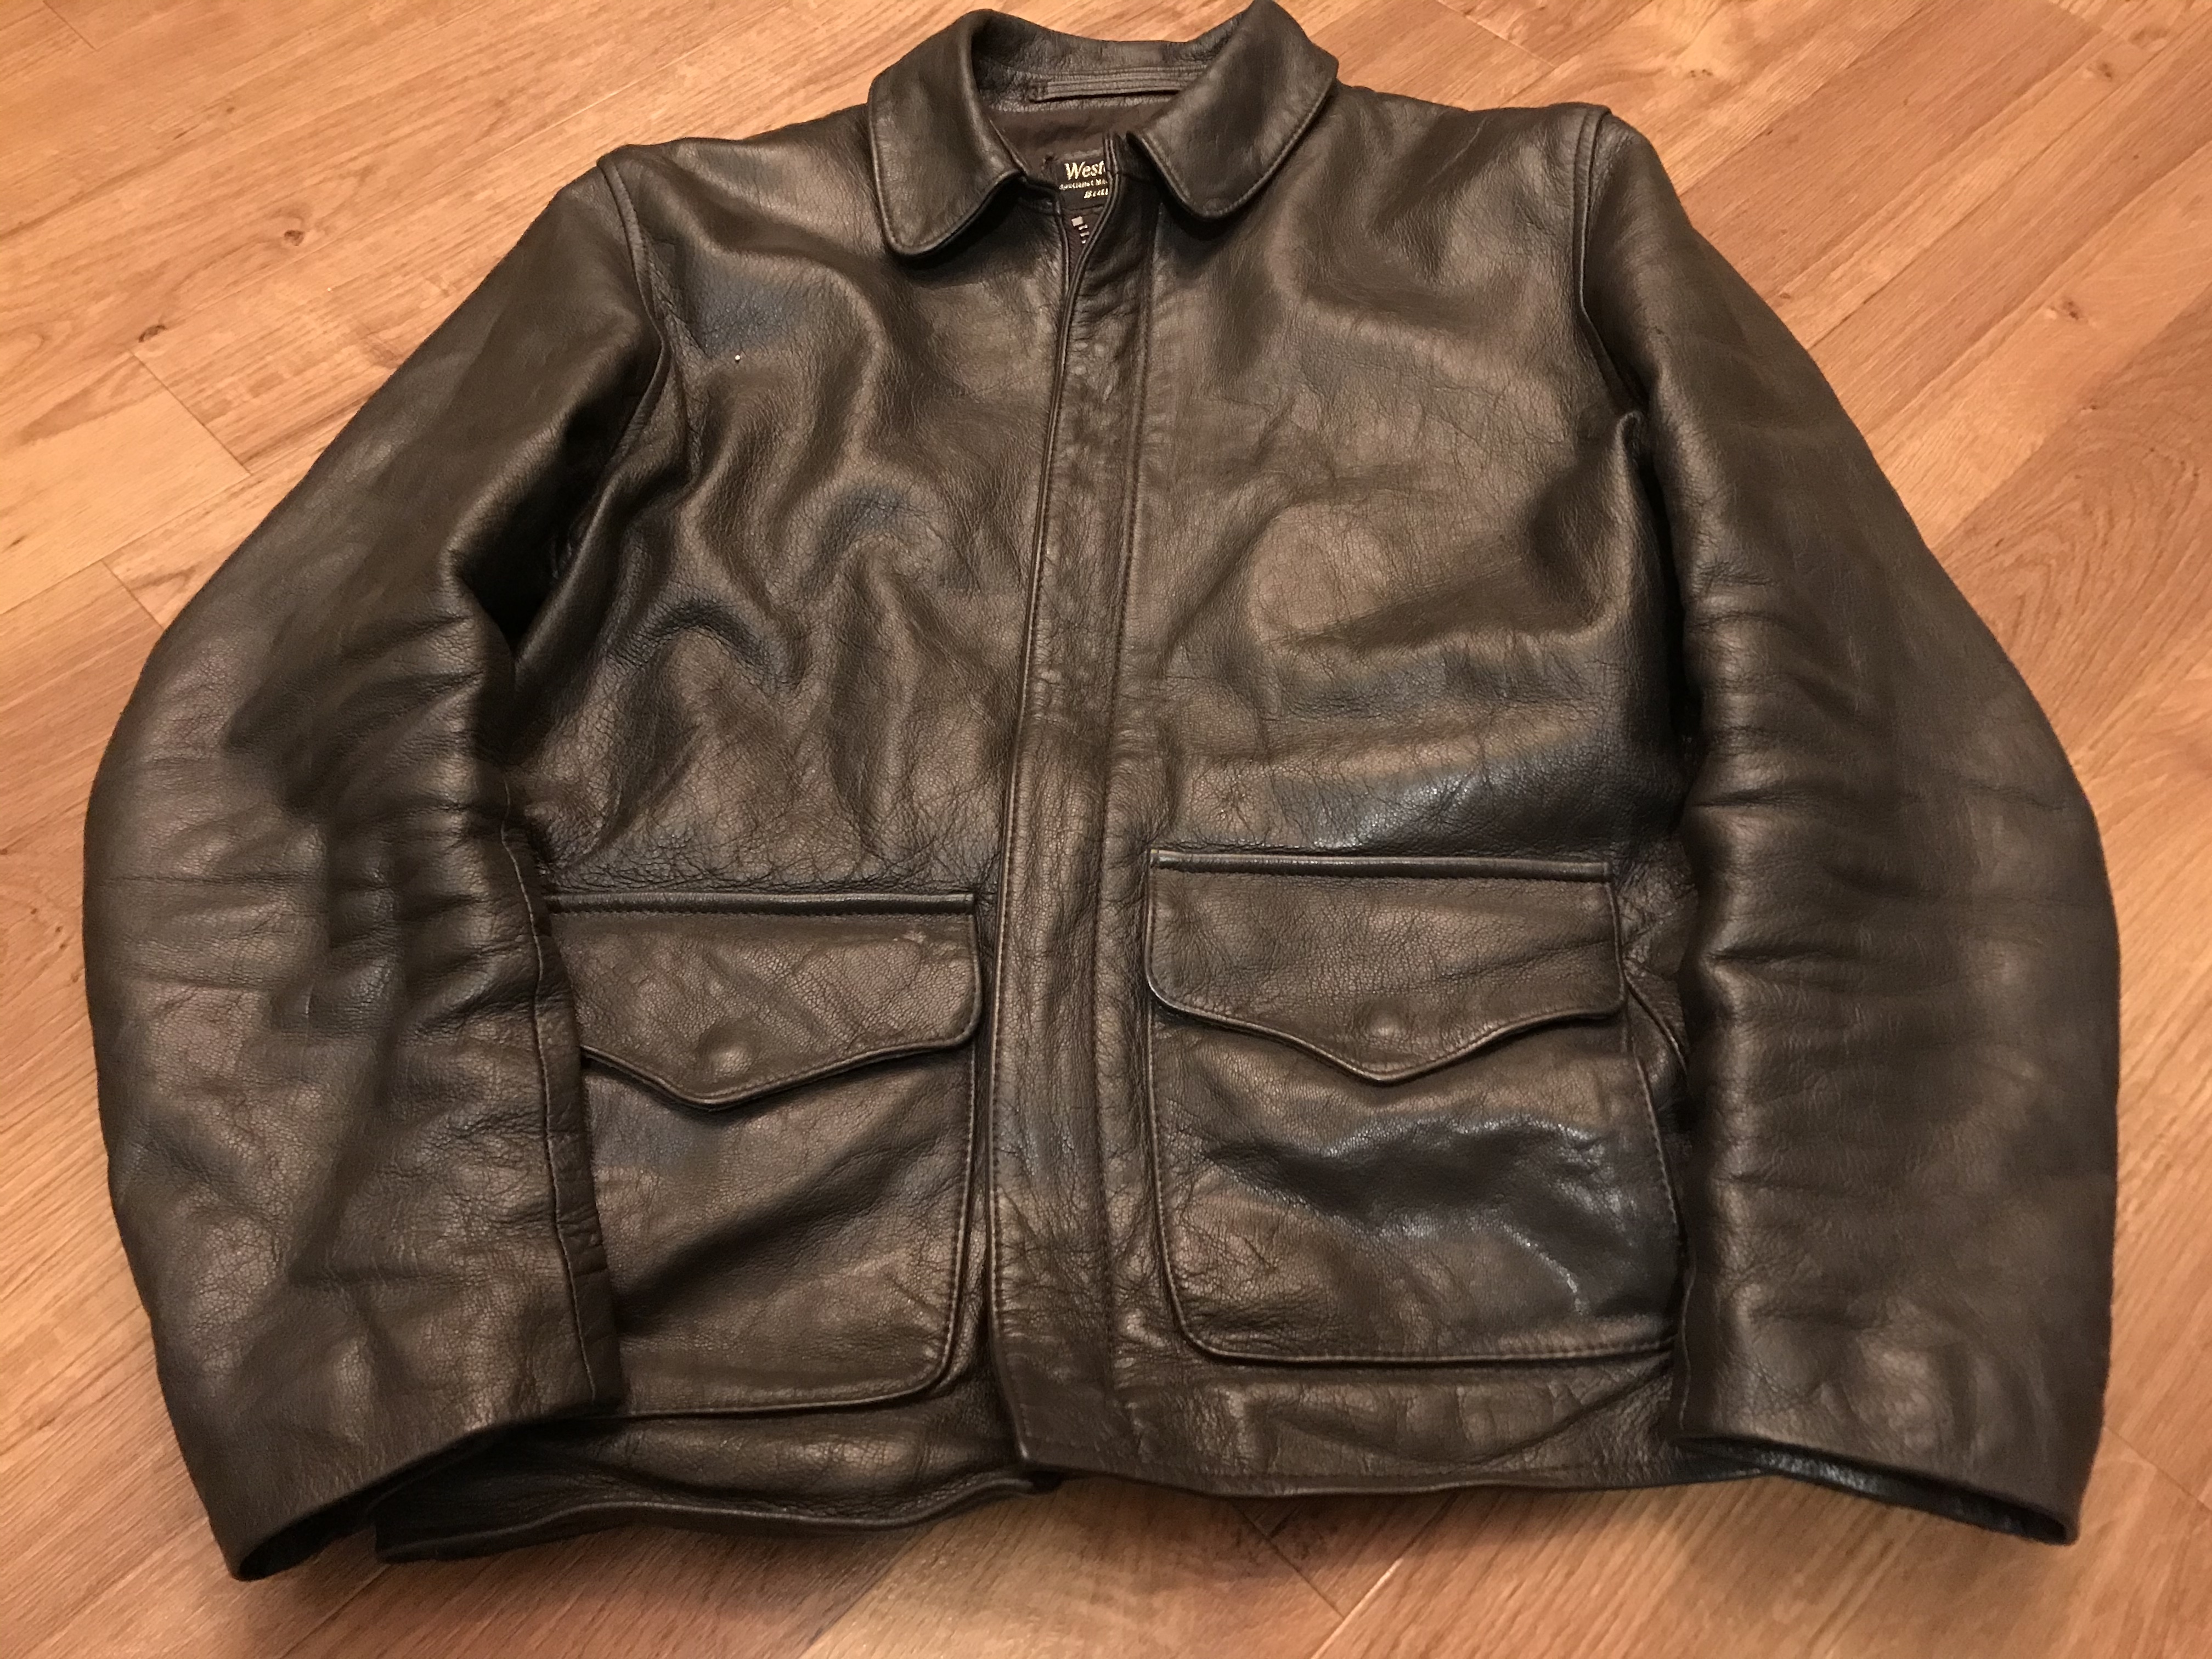 Where to buy Leather Jackets | Page 3 | Vintage Leather Jackets Forum